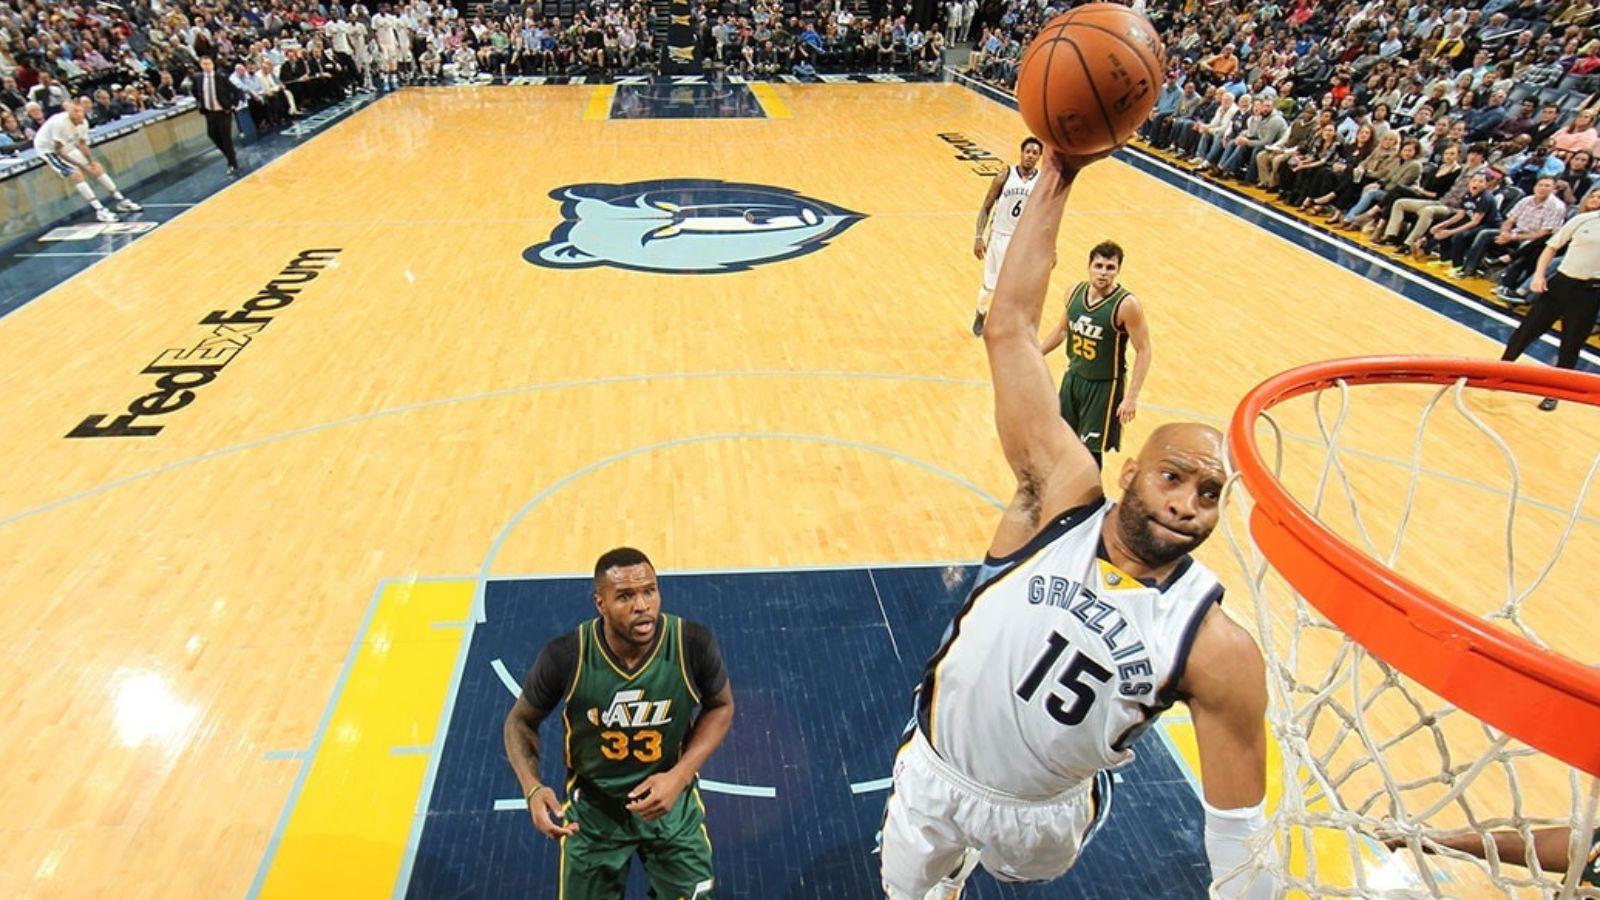 Vince Carter dunking in an NBA game as a member of the Memphis Grizzlies.